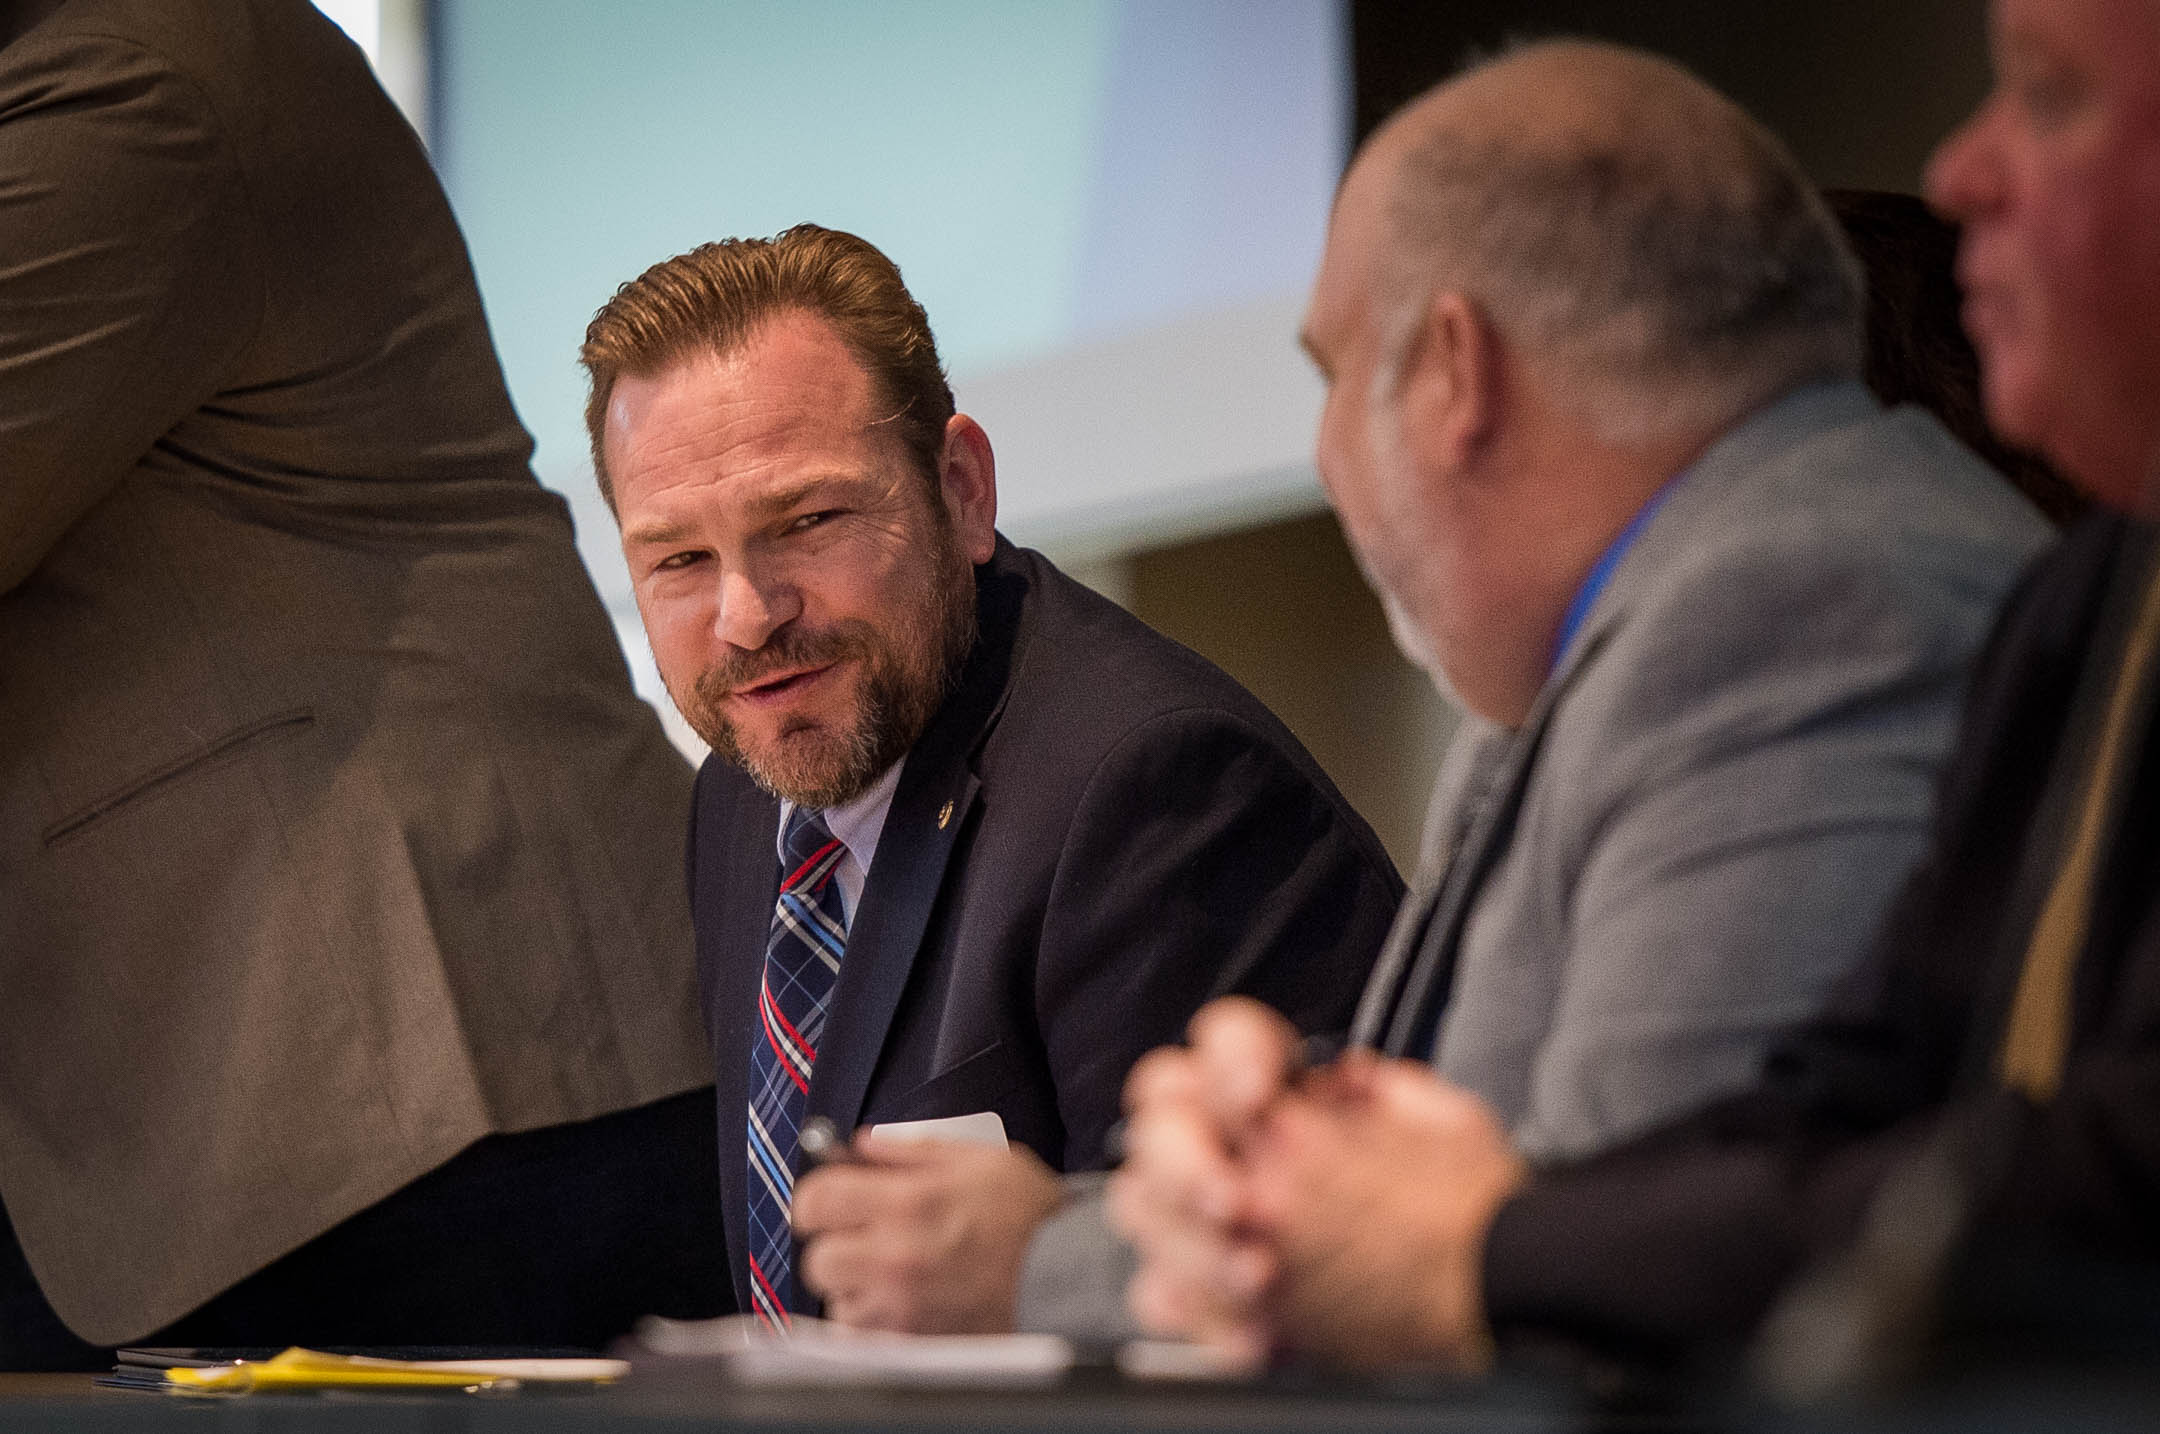 Jim Evans, superintendent of Lee County schools, speaks during a panel discussion at the New Skills for Youth (NSFY) 2017 Fall Forum in Versailles. Evans, who was named 2018 Superintendent of the Year by the Kentucky Association of School Administrators, said partnerships such as those developed in the NSFY program have been critical for his small district as it tries to provide opportunities for its students. Photo by Bobby Ellis, Nov. 27, 2017